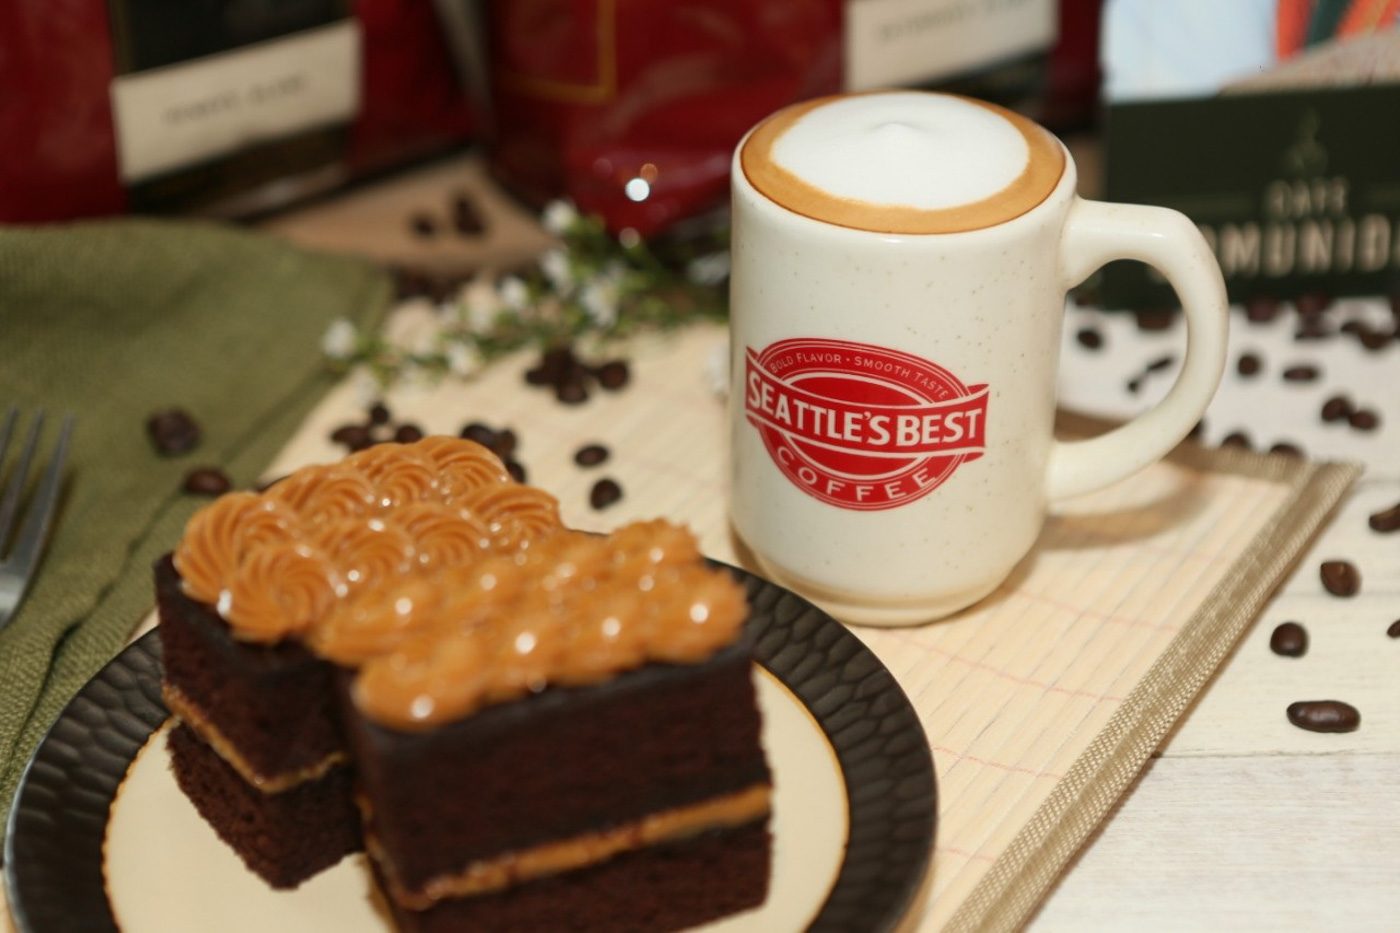 Get a kick out of these local coffees and pastries